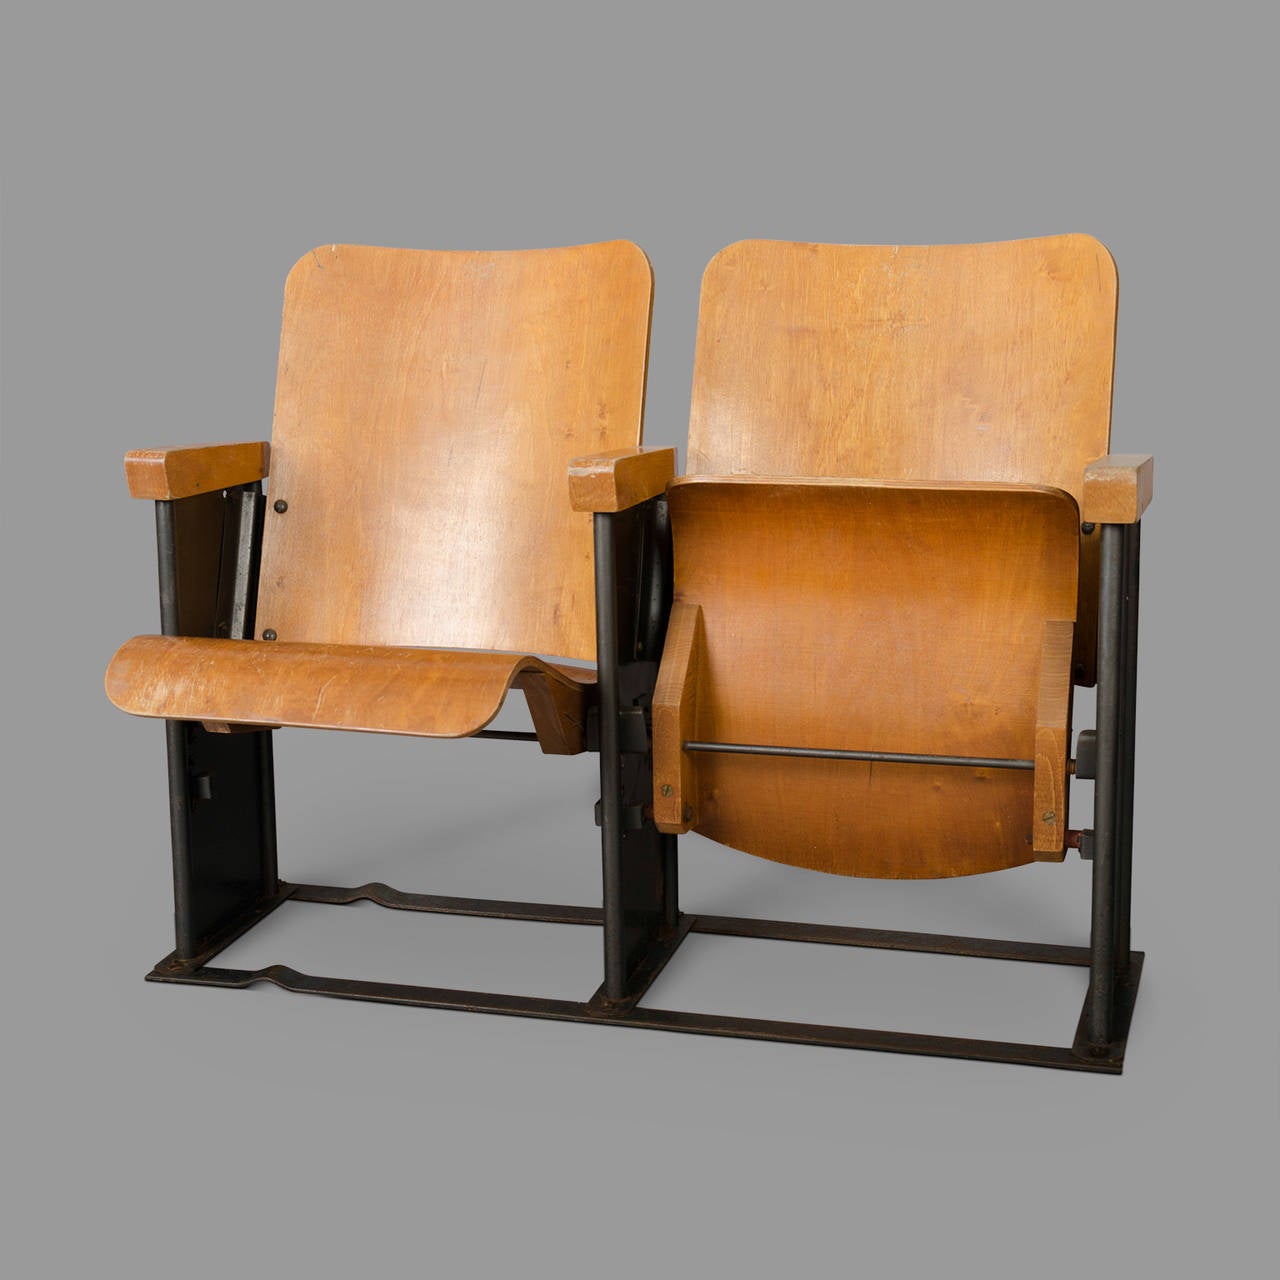 From a military base, these two seats row Wooden movie theater seats in molded plywood and bent sheet metal, are typical of the 1950s. Very stable, they do not necessarily require floor fixation unlike many models of the same style.

Four and Two